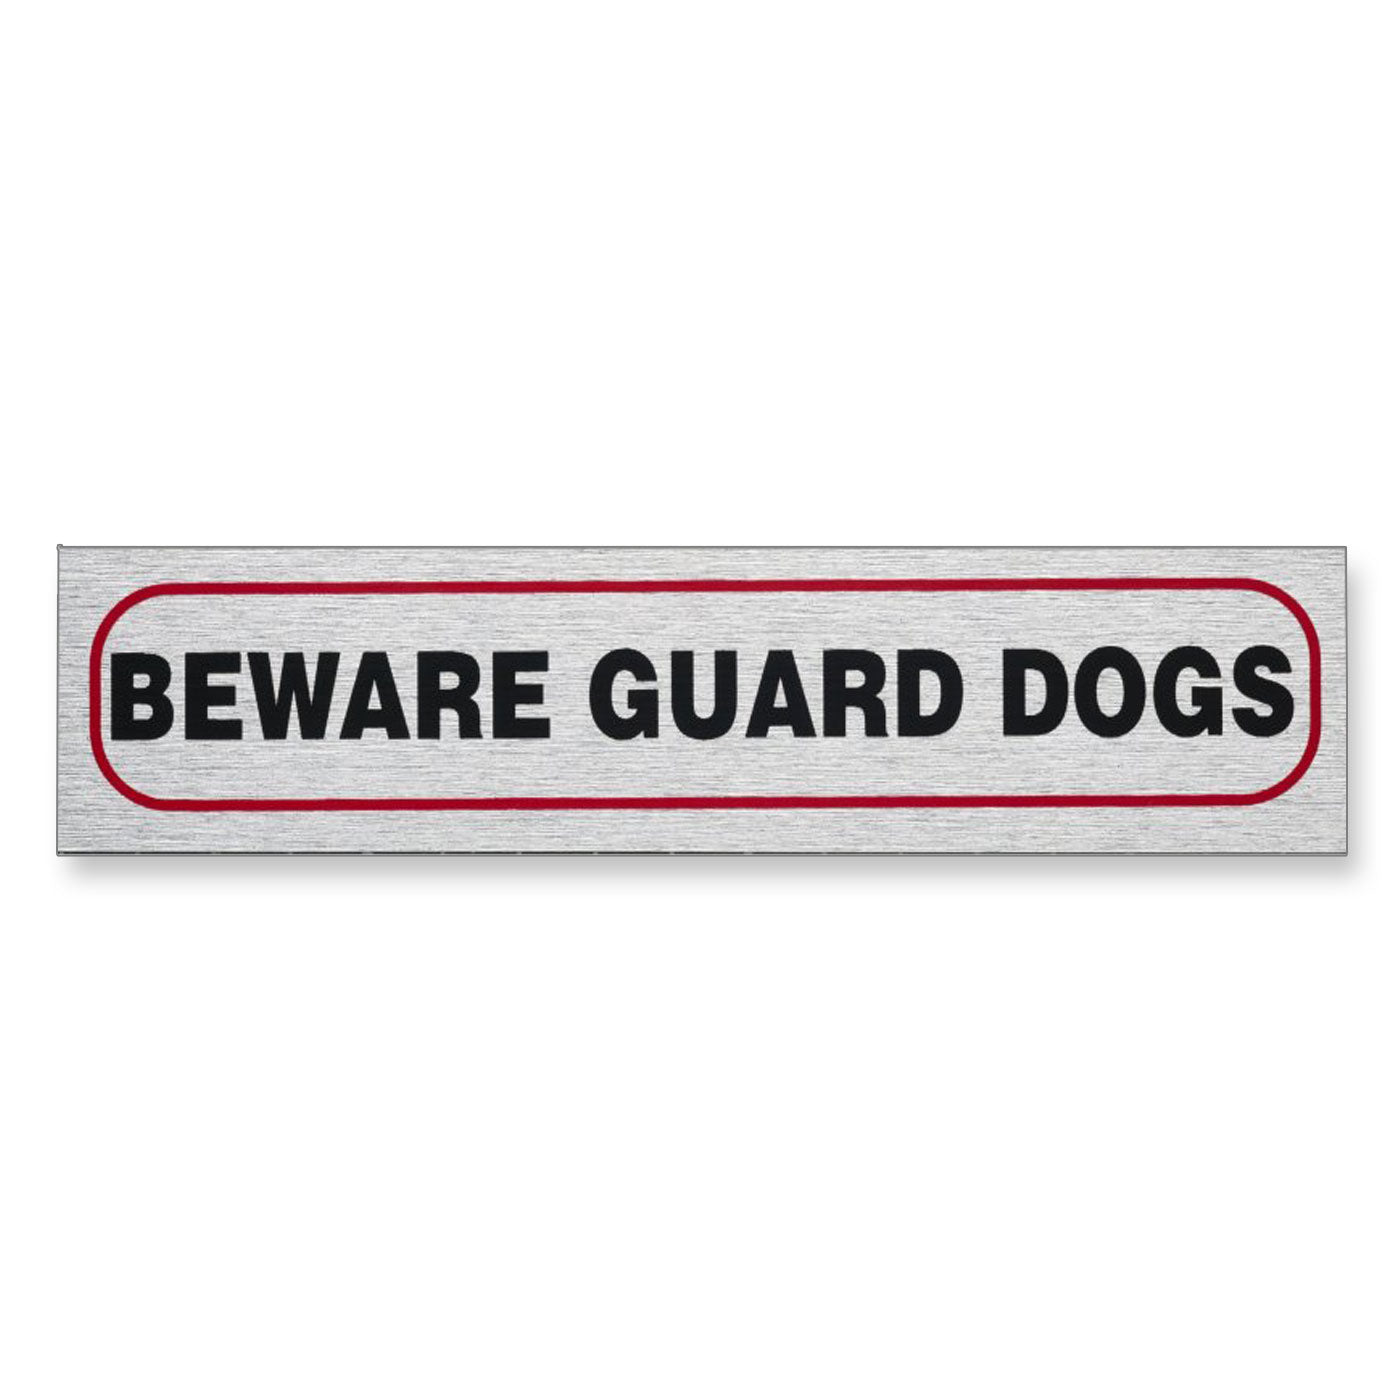 Information Sign "BEWARE GUARD DOGS" 17 x 4 cm [Self-Adhesive]